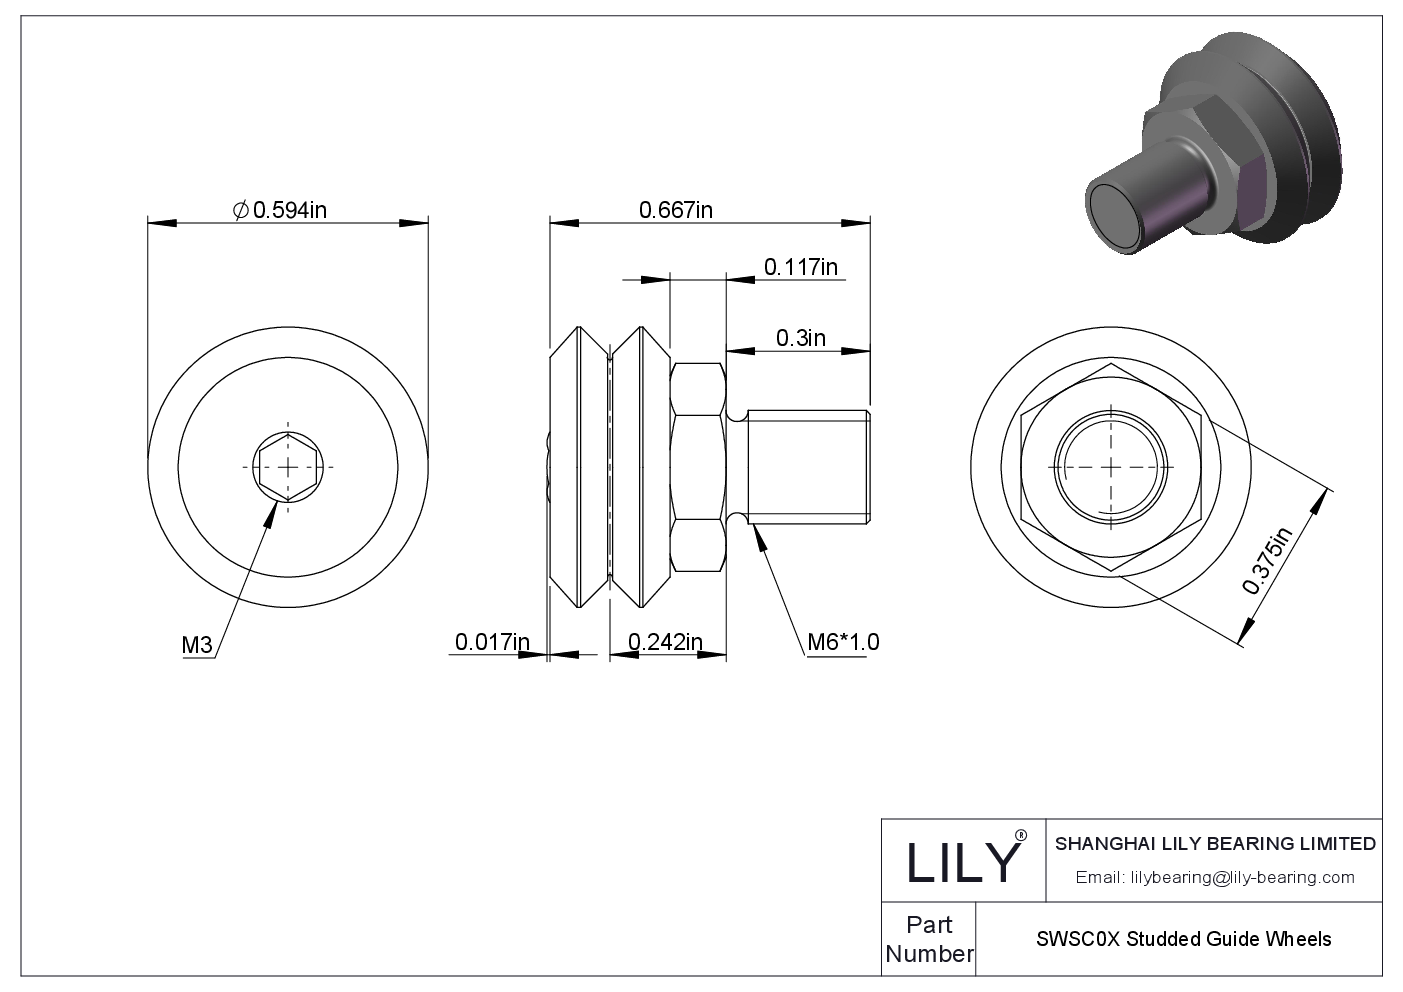 SWSC0X Studded Guide Wheels cad drawing